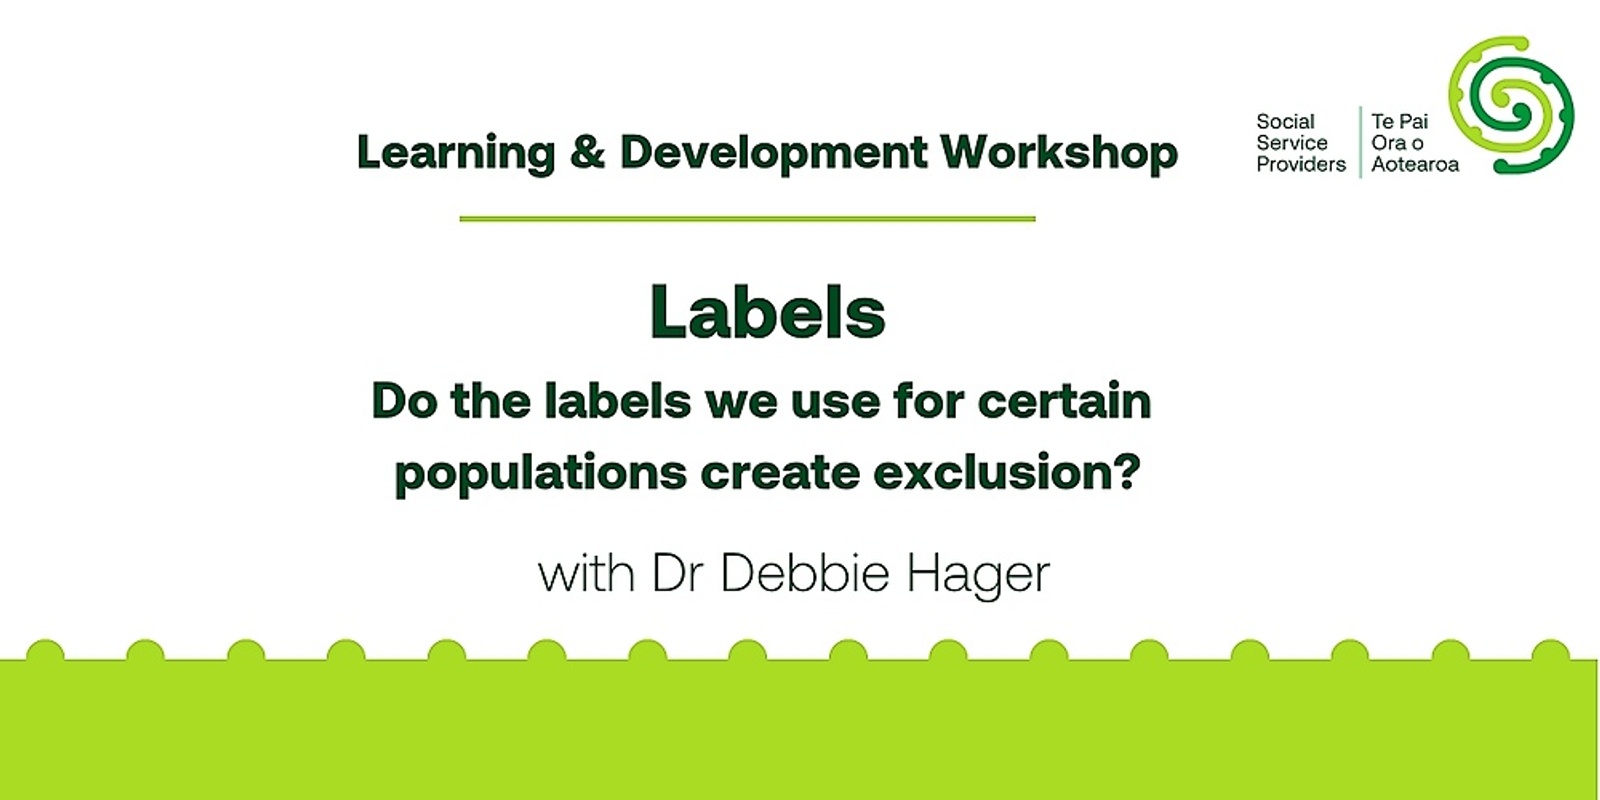 Labels – Do the labels we use for certain populations create exclusion?